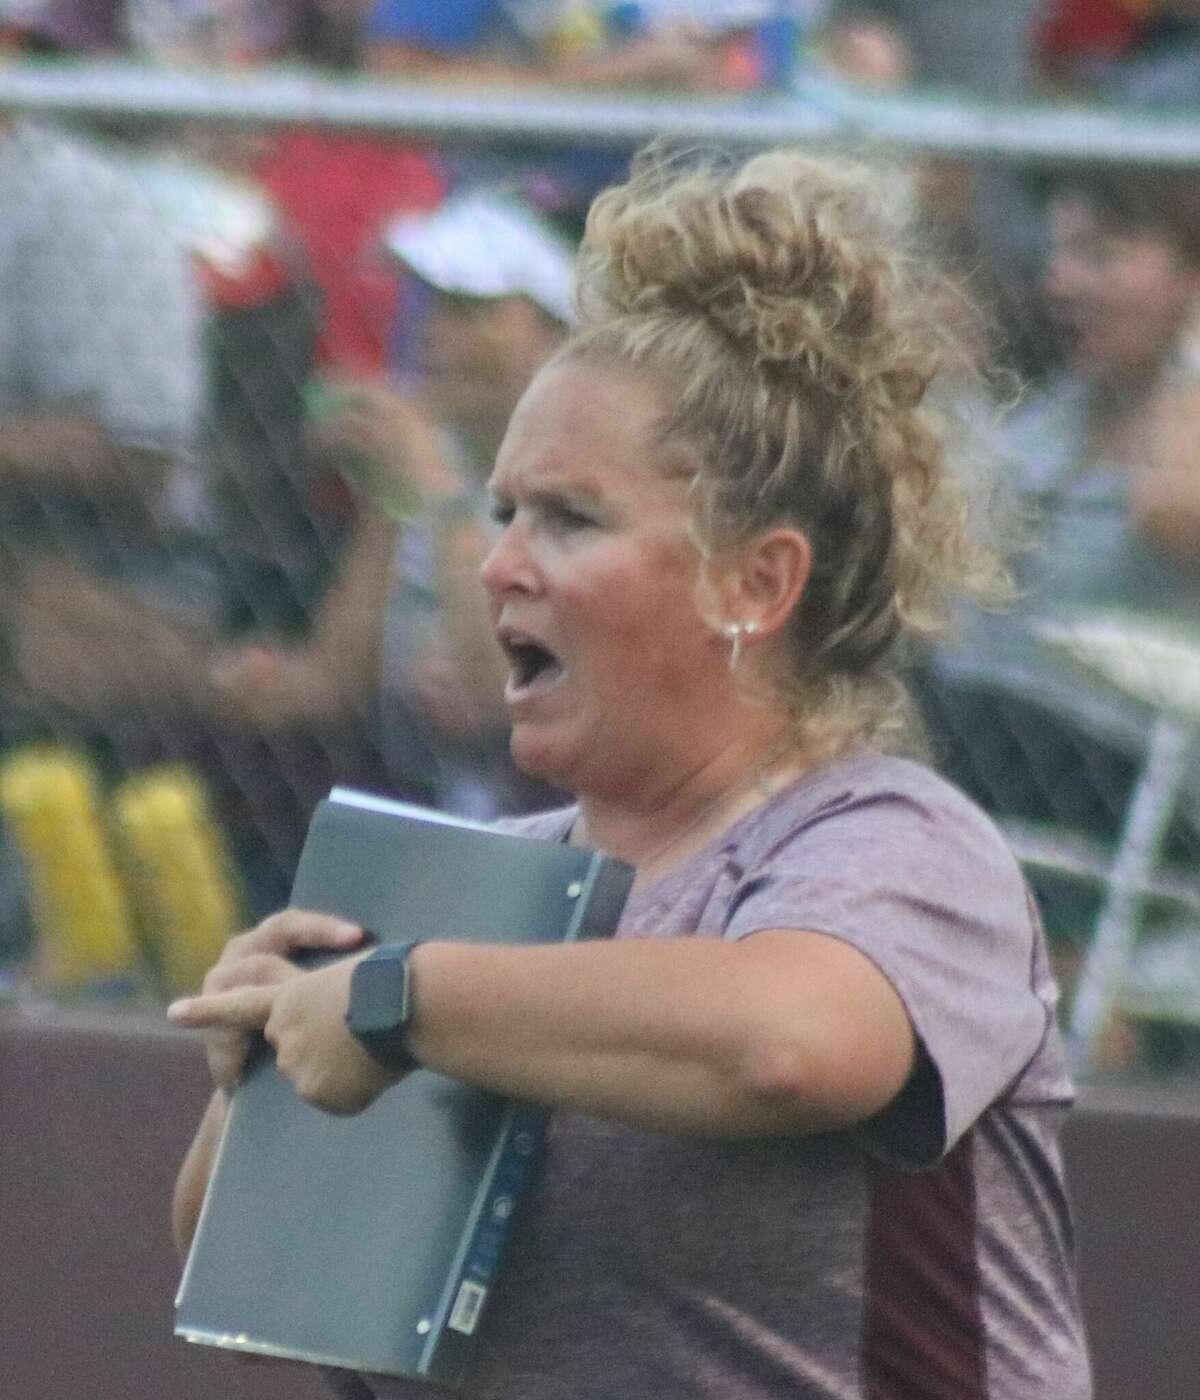 Deer Park head coach Amy Vidal watched the Lady Deer offense belt four doubles and a solo homer in five of the last six innings in the team's 7-3 non-district win over Dawson Monday afternoon.